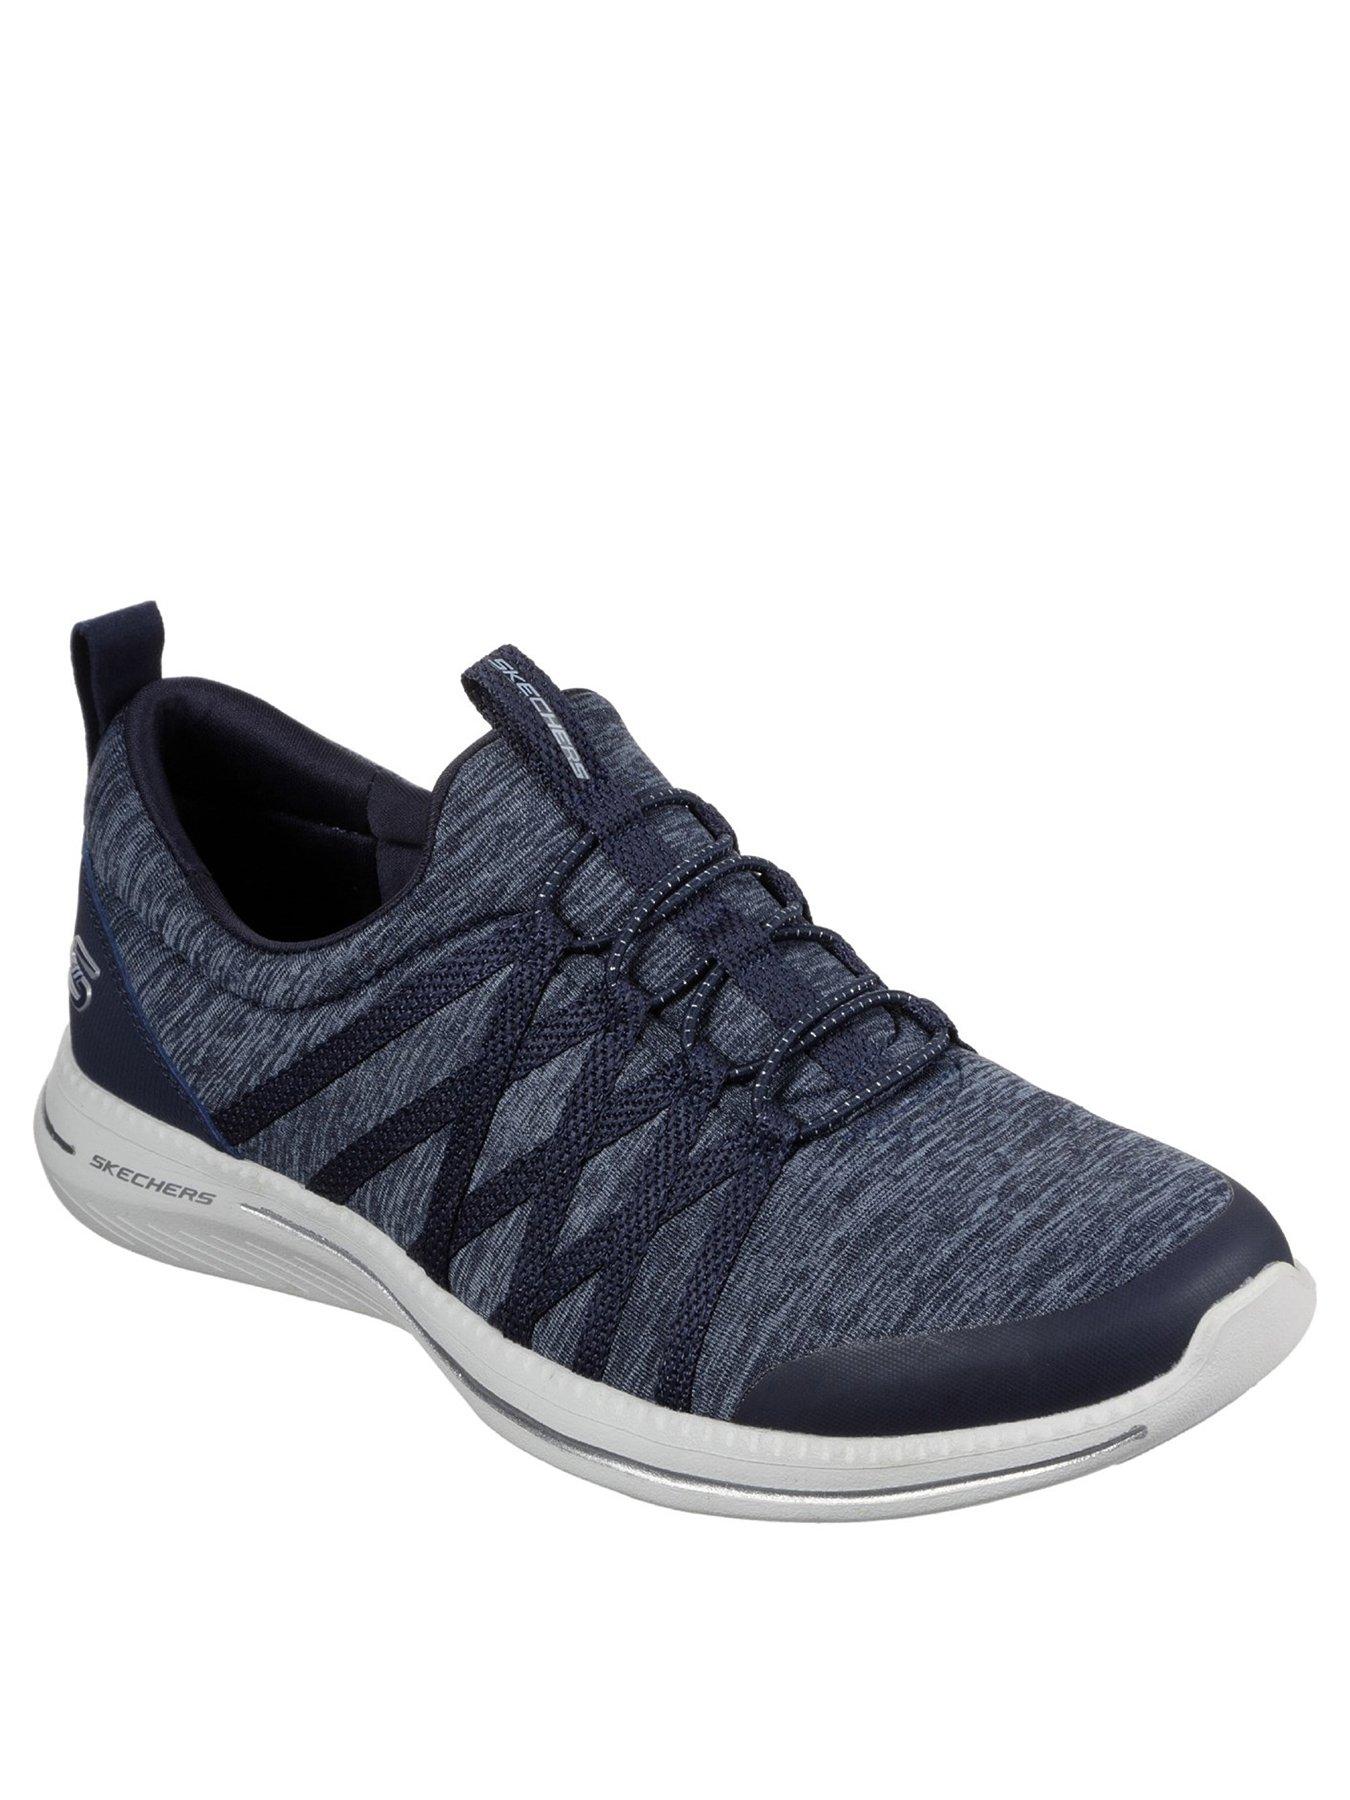 skechers fashion fit wedge trainer